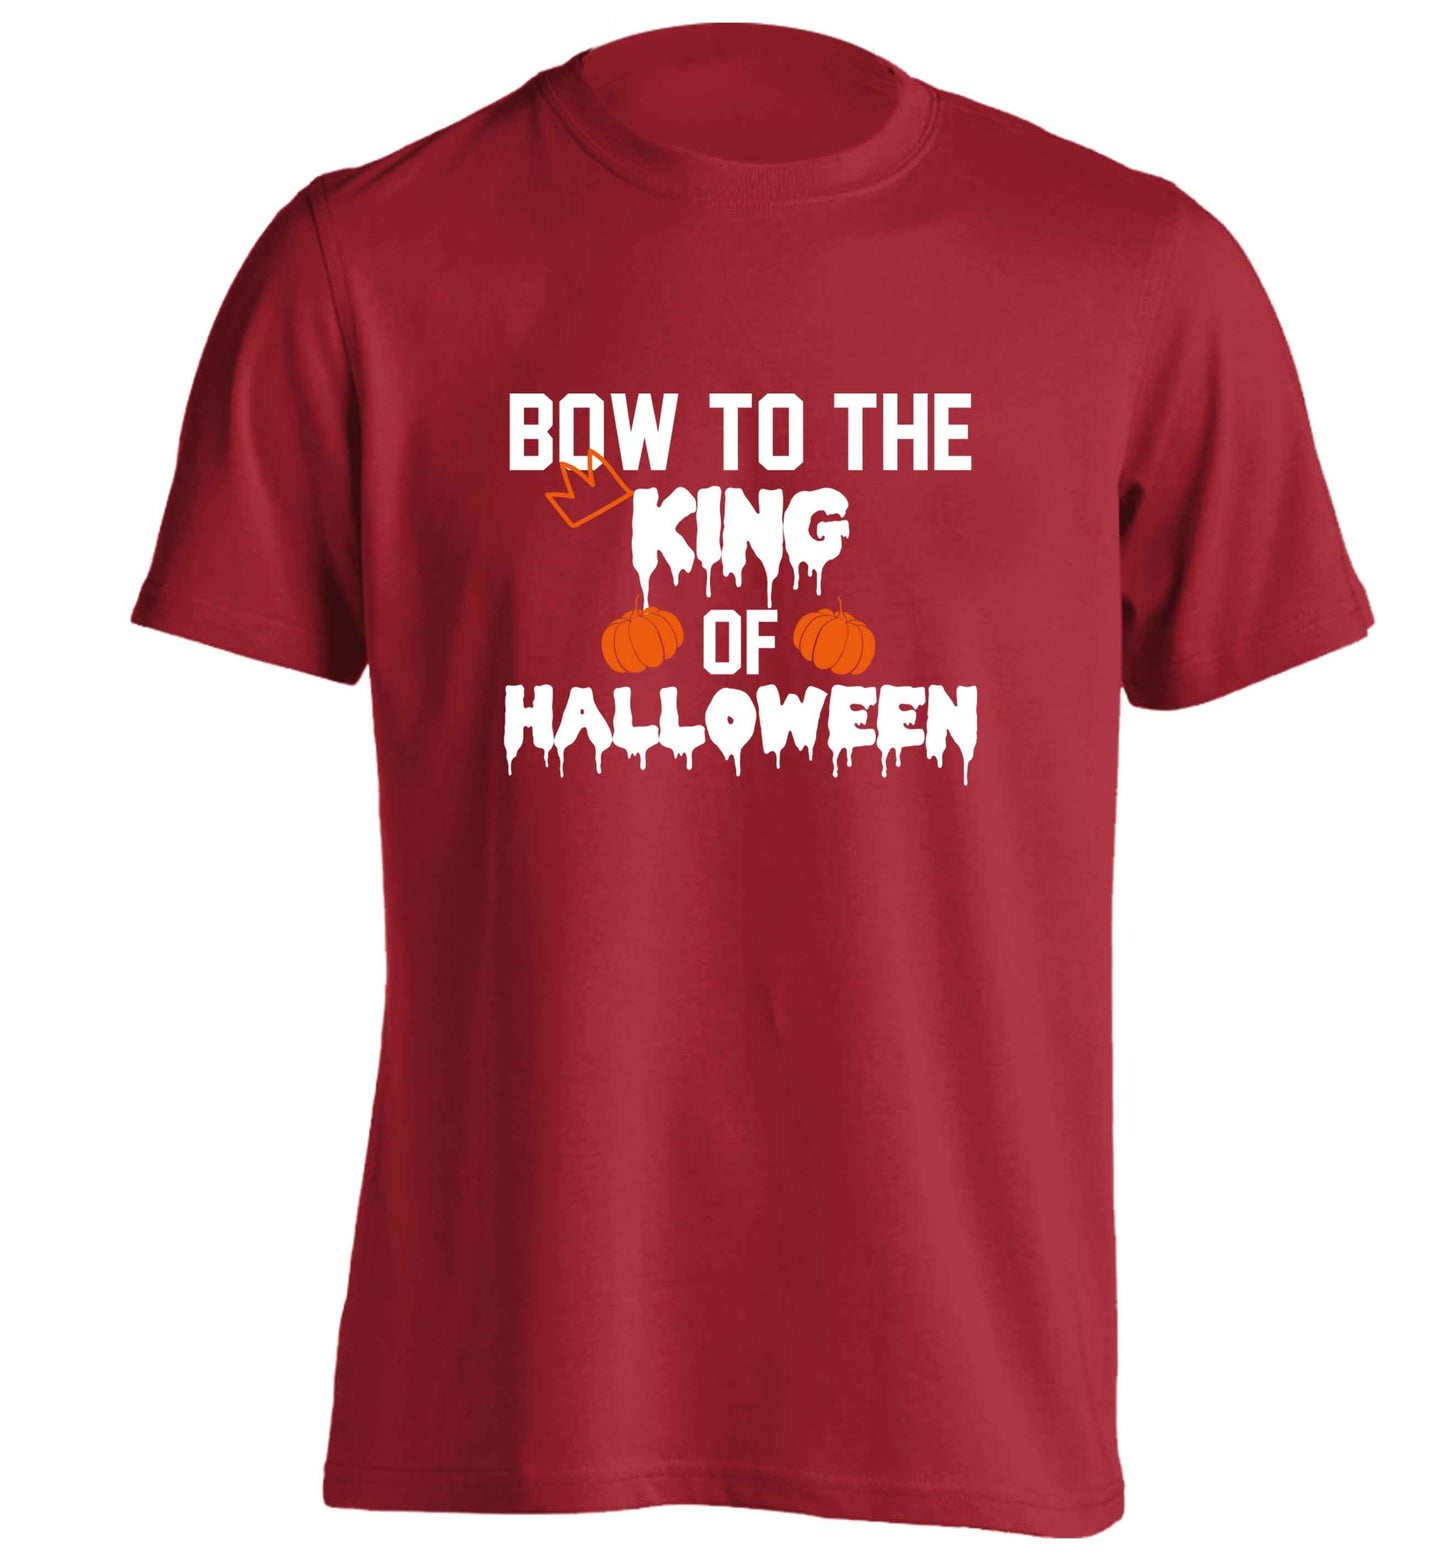 Bow to the King of halloween adults unisex red Tshirt 2XL